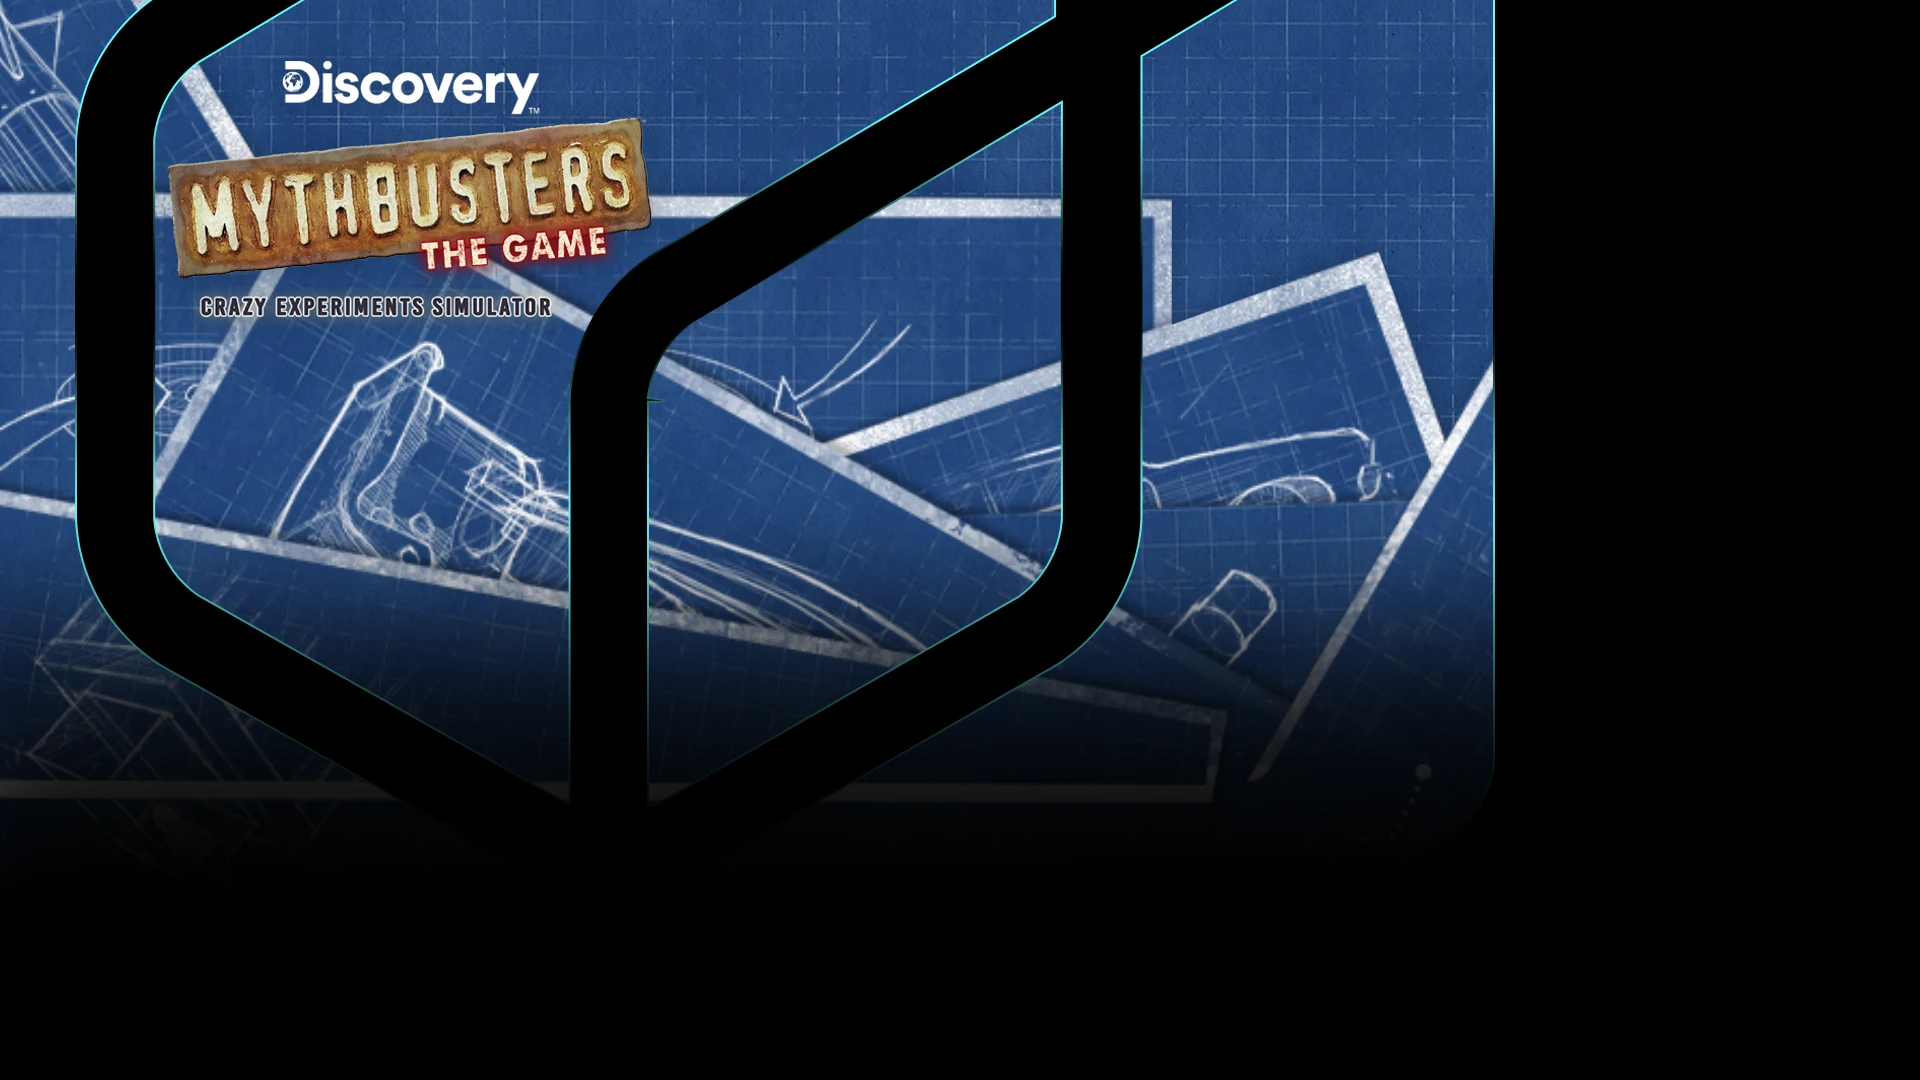 <span style="text-align: center;">MythBusters: The Game <span class="outline">has arrived!<span></span>